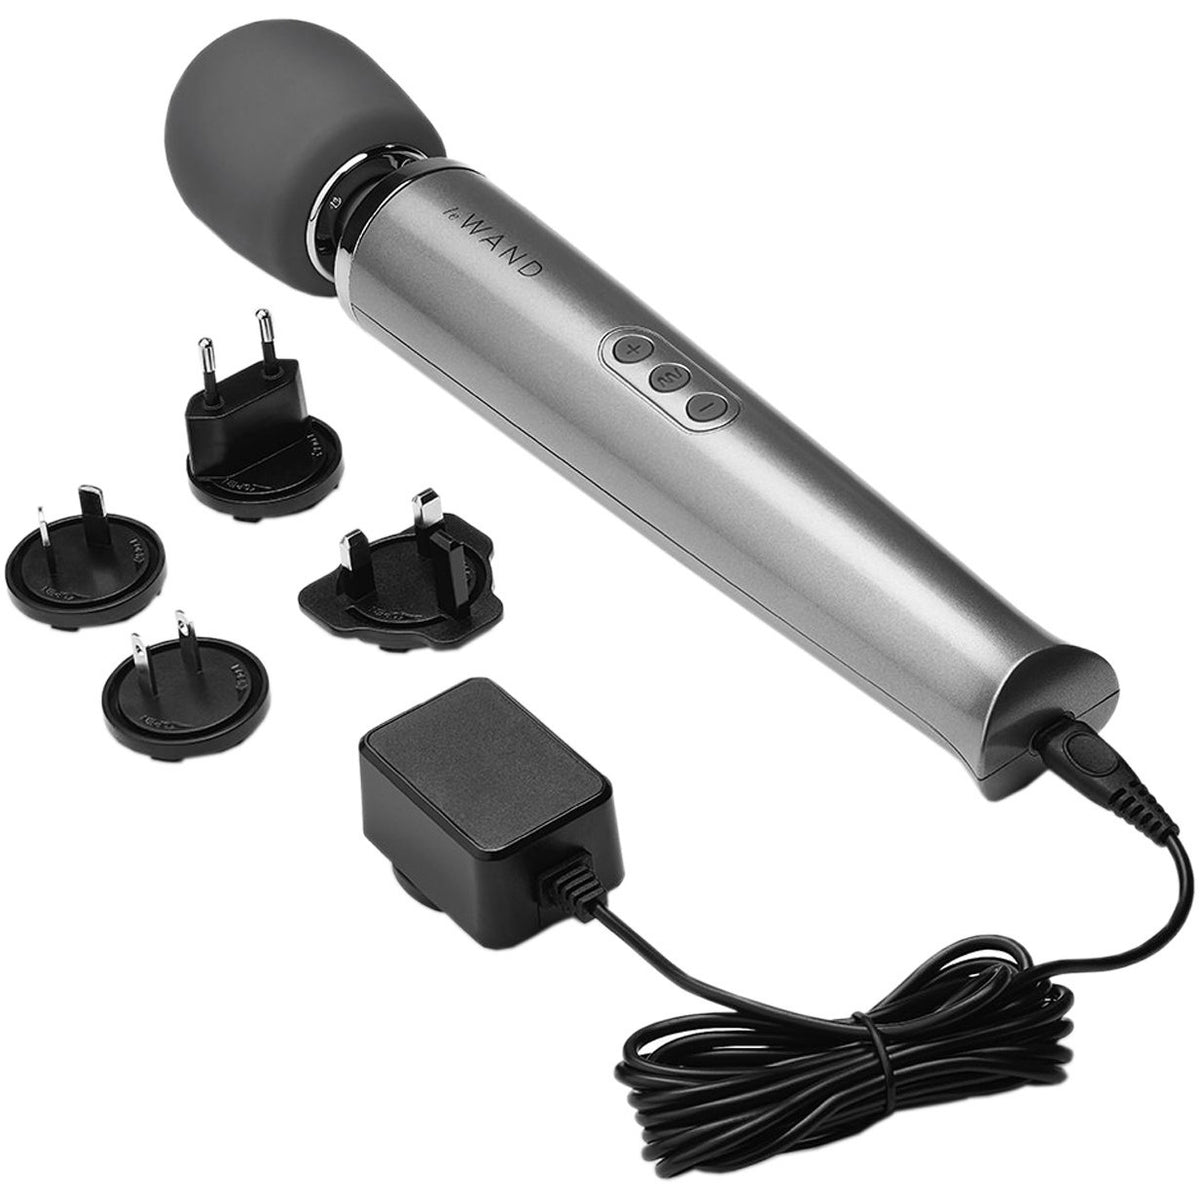 Le Wand Le Wand Rechargeable Massager – Grey